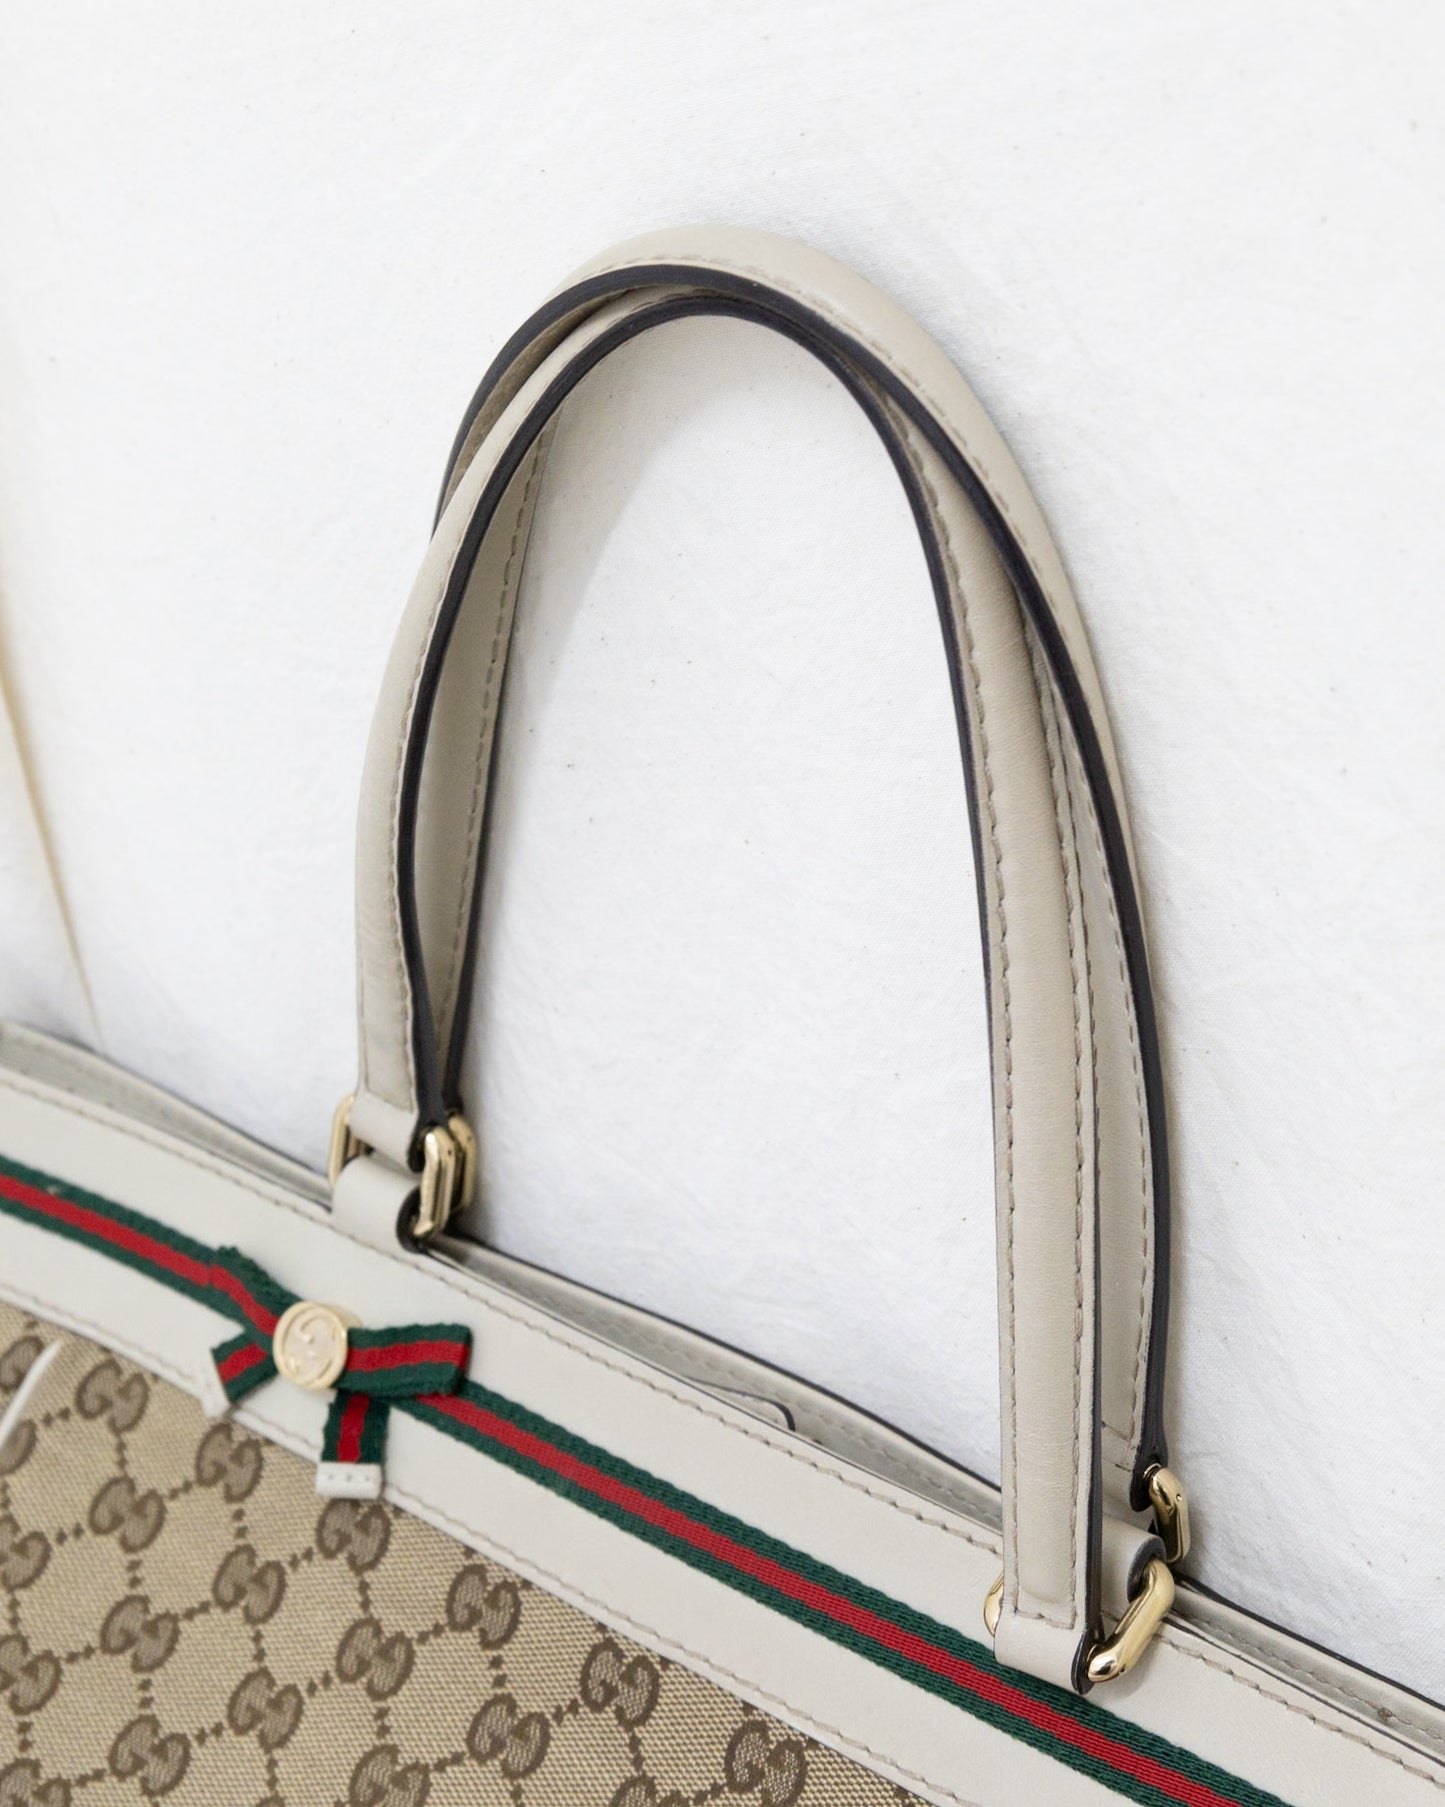 GUCCI Mayfair Tote